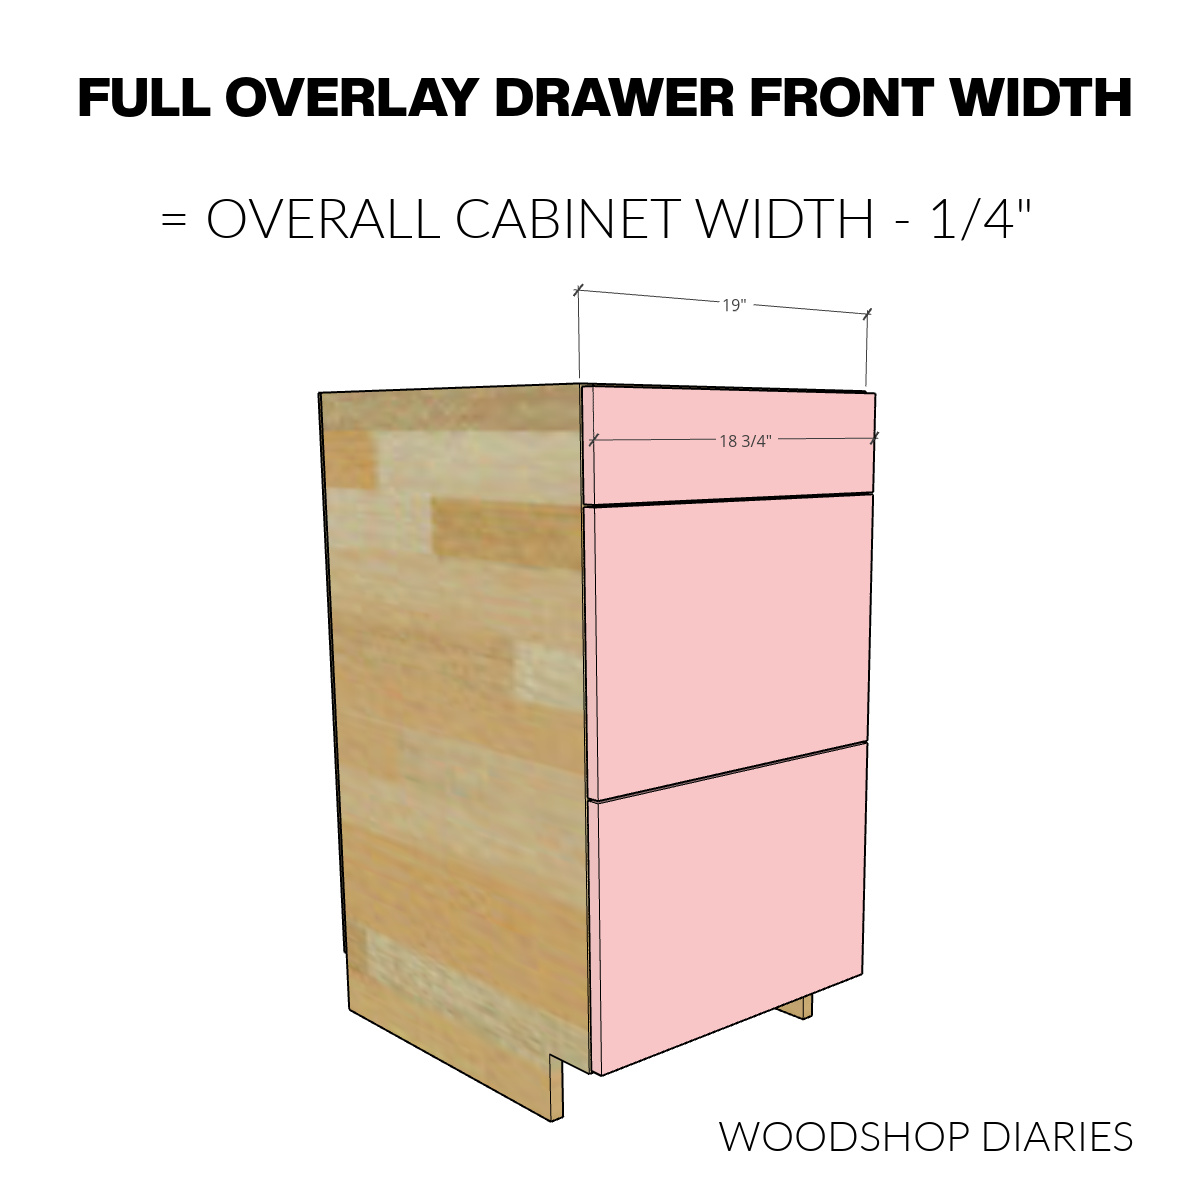 Computer drawn diagram showing drawer front width for full overlay drawers